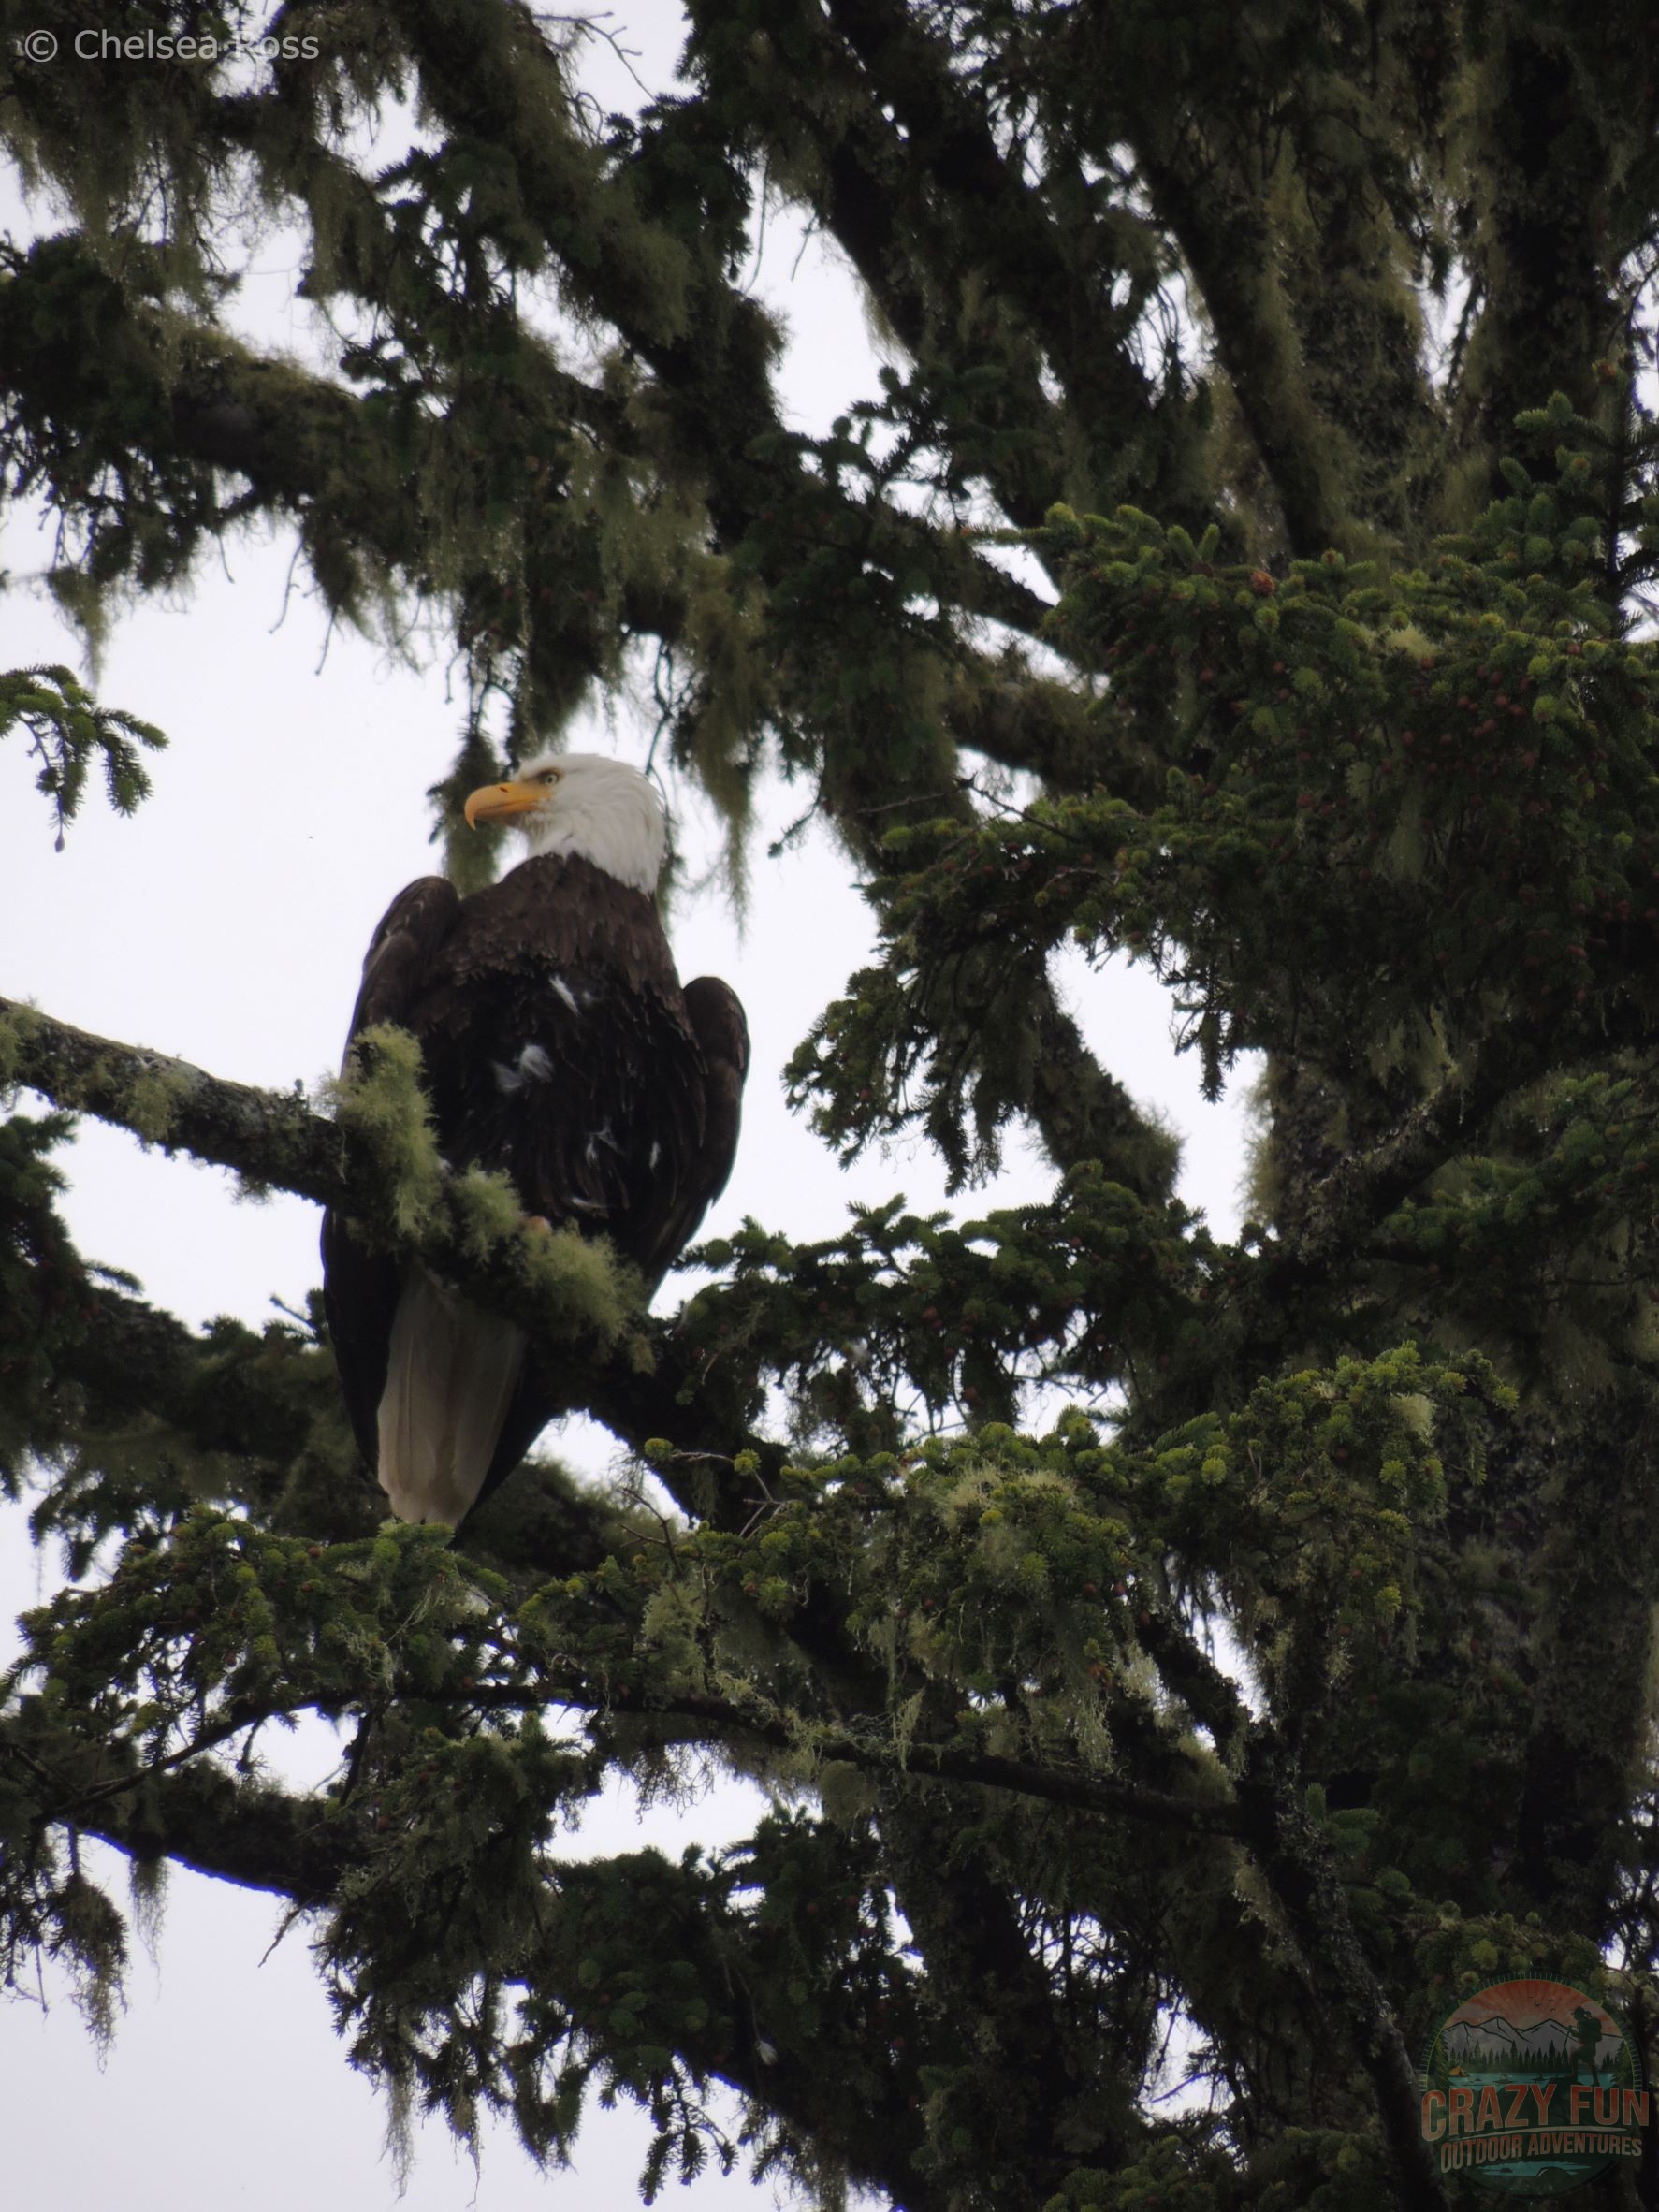 West Coast Trail tips: Look for wildlife! A Bald Eagle is in a tree.